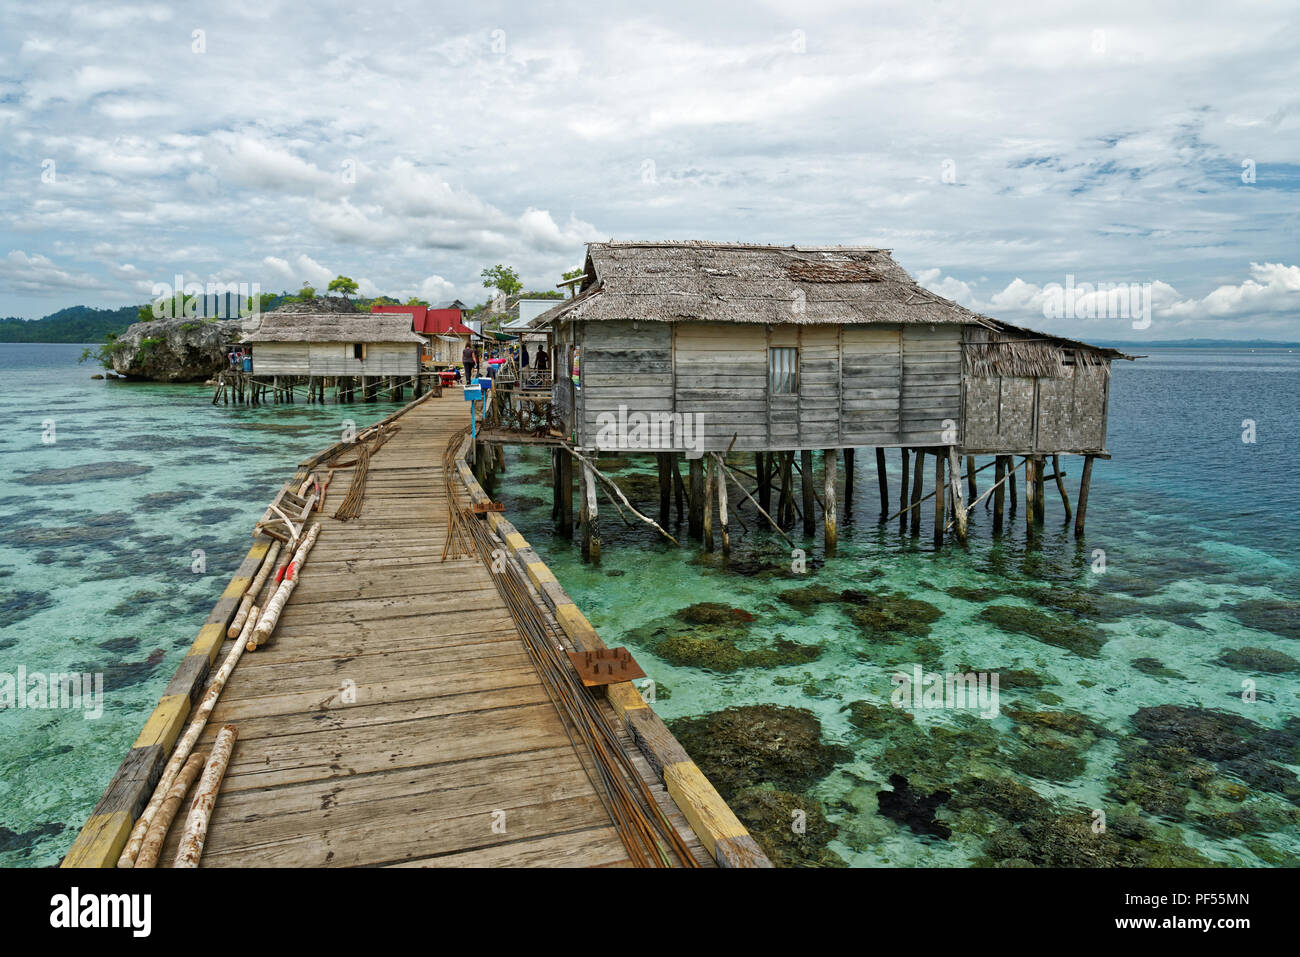 View of traditional bajo village with bridge and wooden houses on the Togean islands in Central Sulawesi, Indonesia Stock Photo